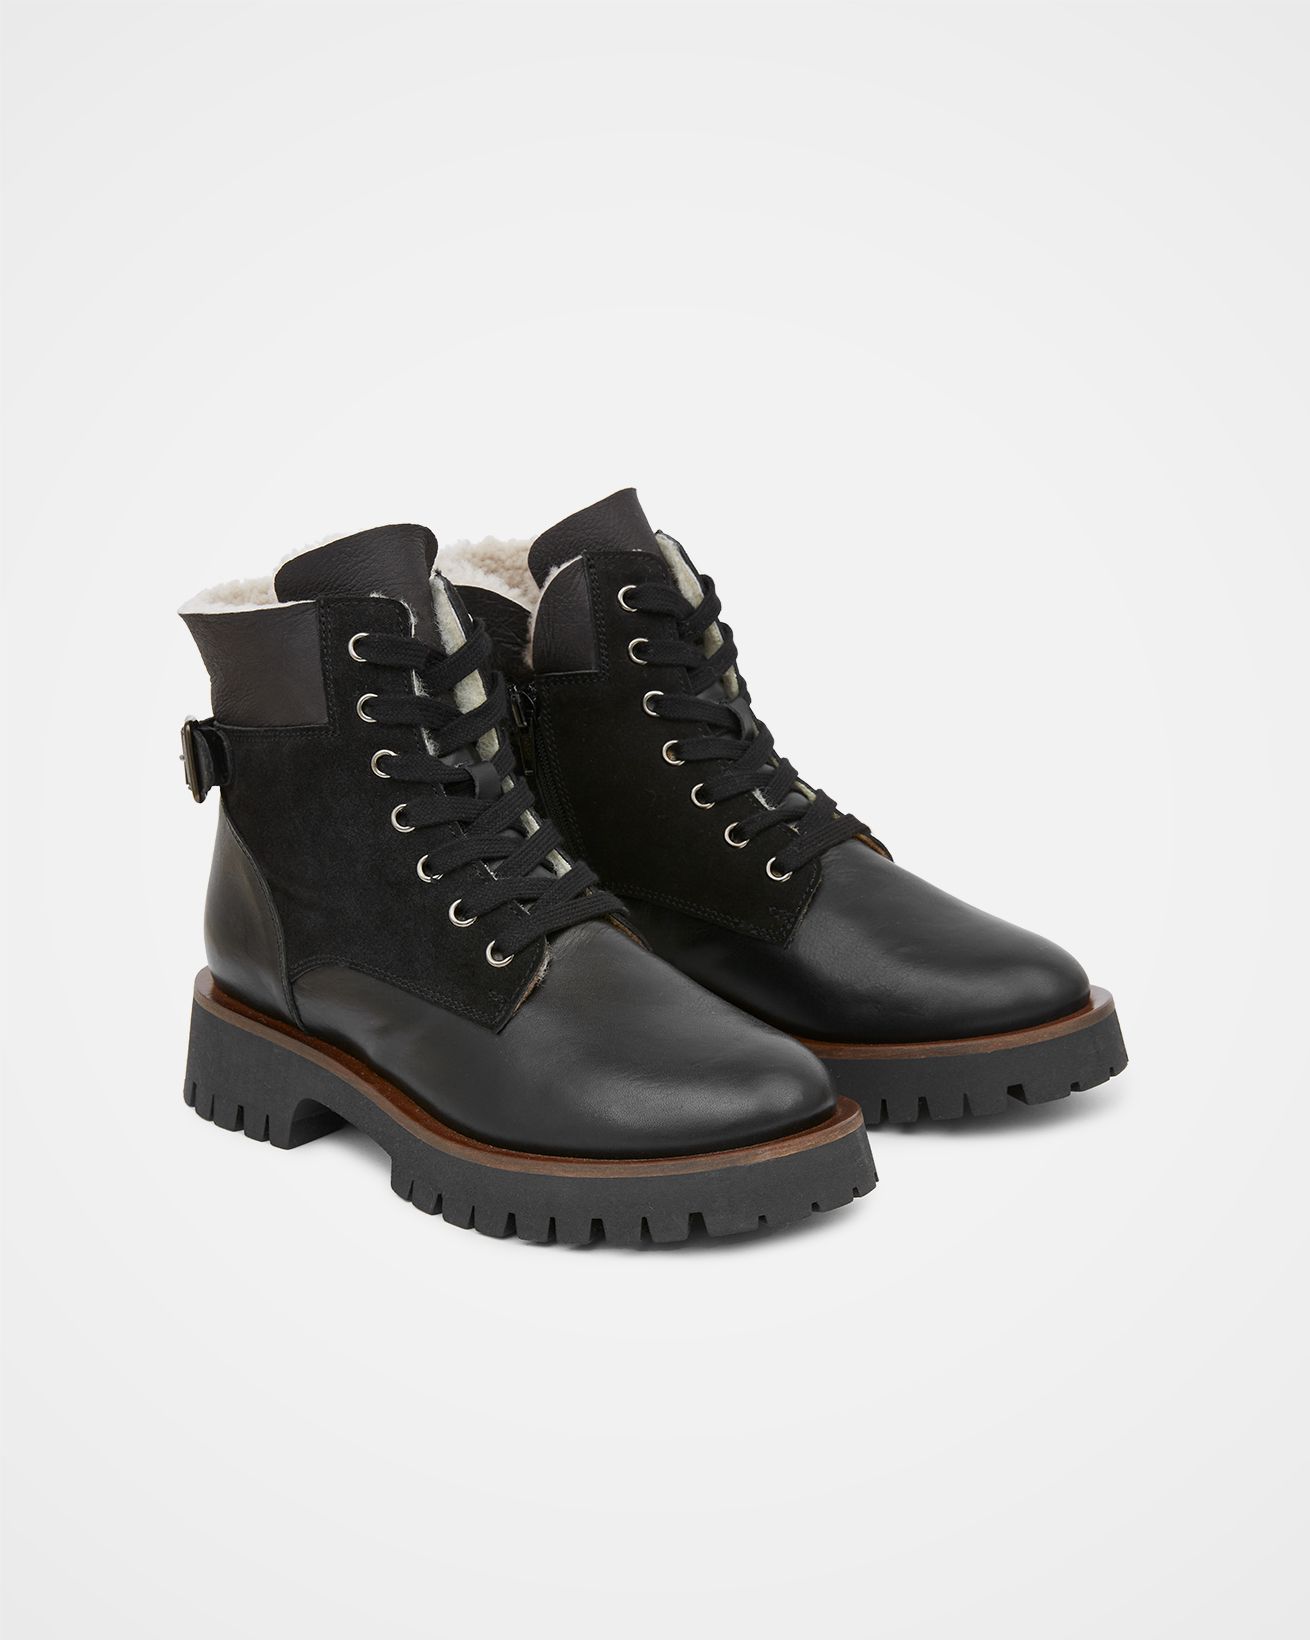 8330_sheepskin-and-leather-lace-up-boot_black_pair_web.jpg